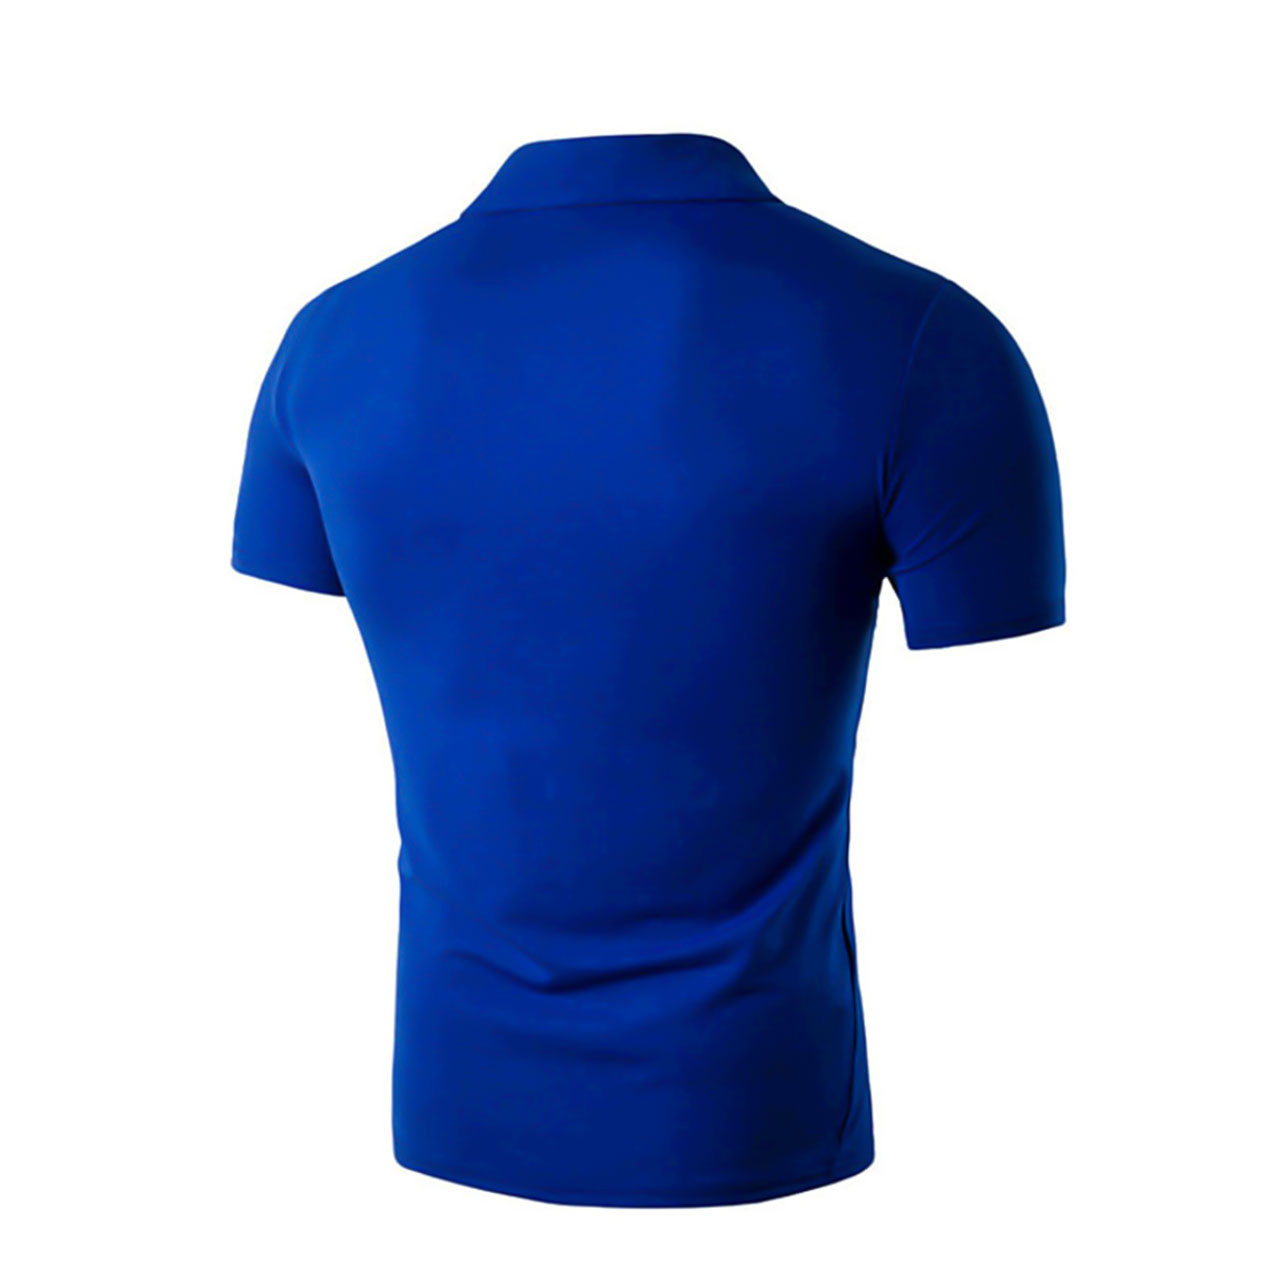 Men's Active Sports Going Out Weekend Summer Short Sleeve Royal Blue Polo Shirt With Collar